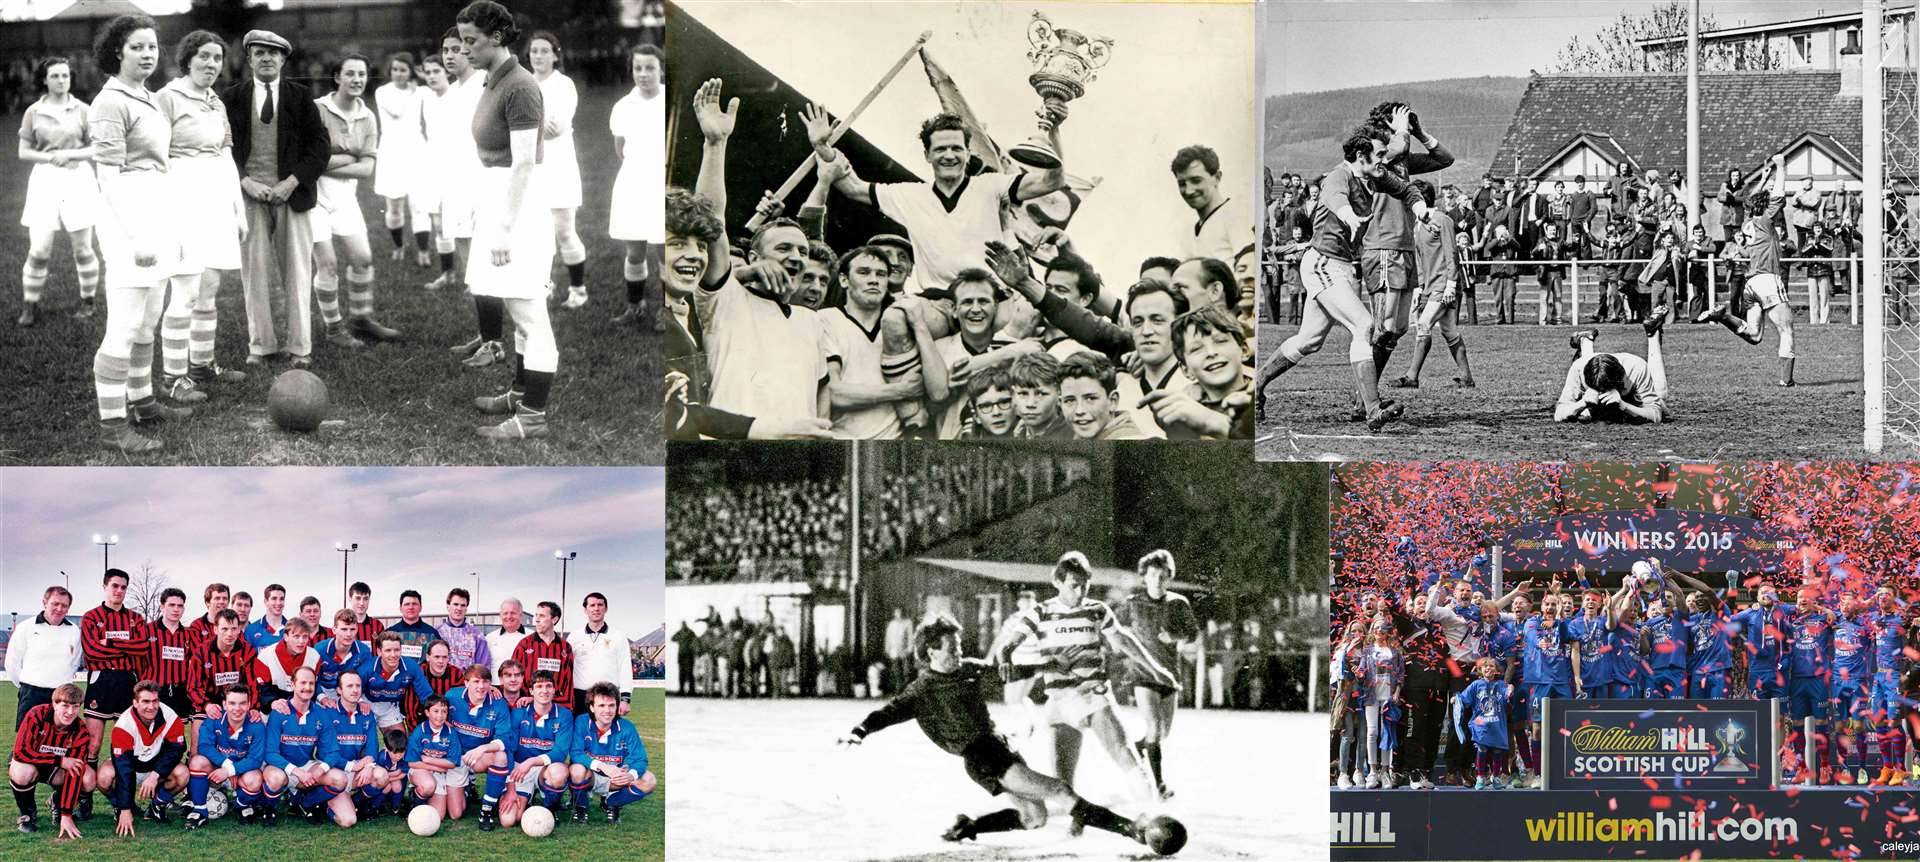 A montage of famous moments in Inverness football history